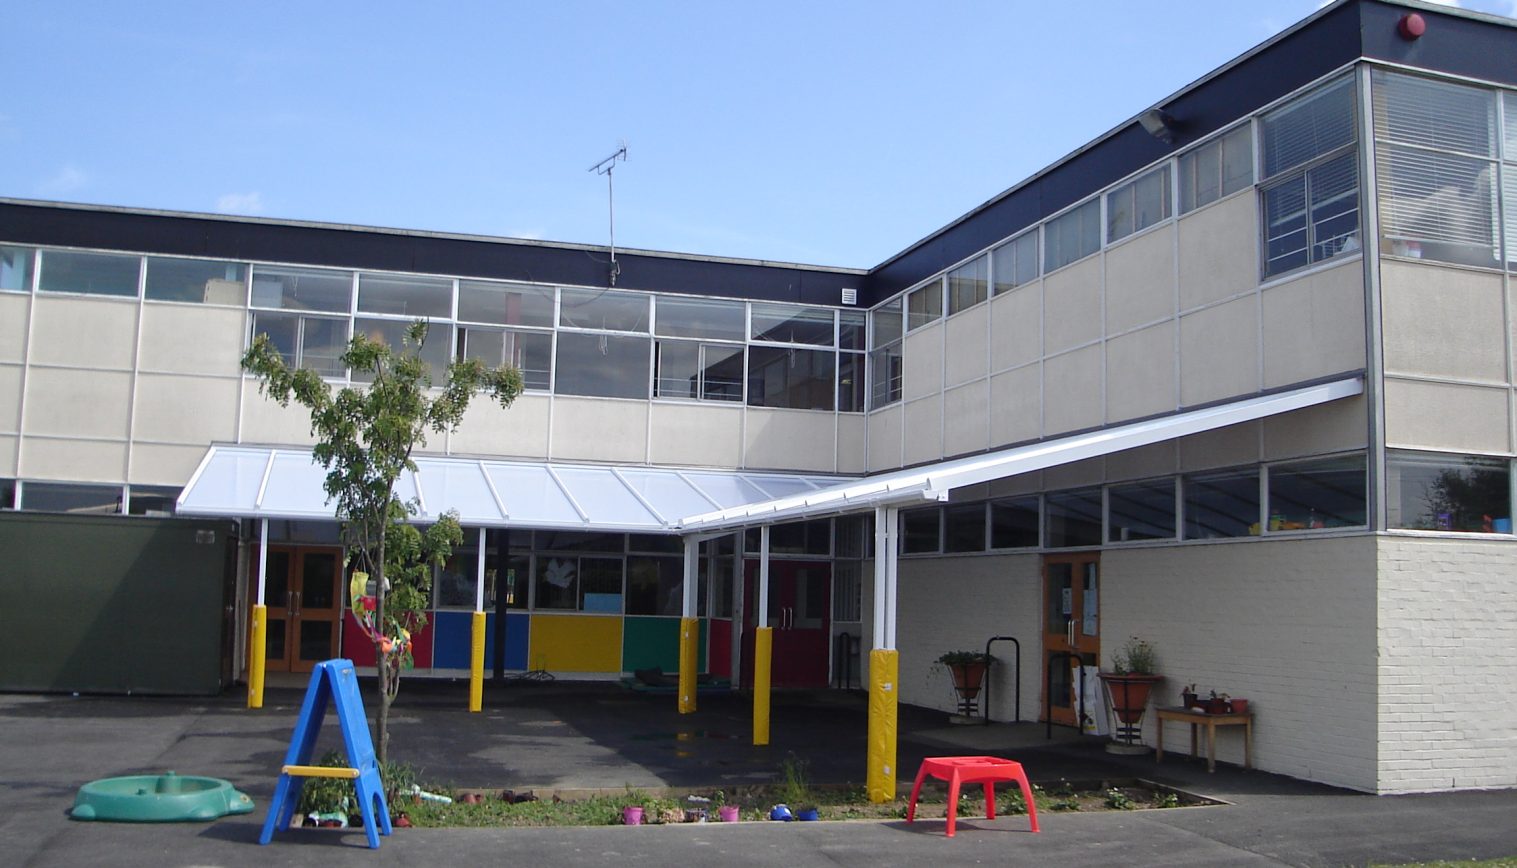 Linden Grove Primary School – Wall mounted canopy – First installation